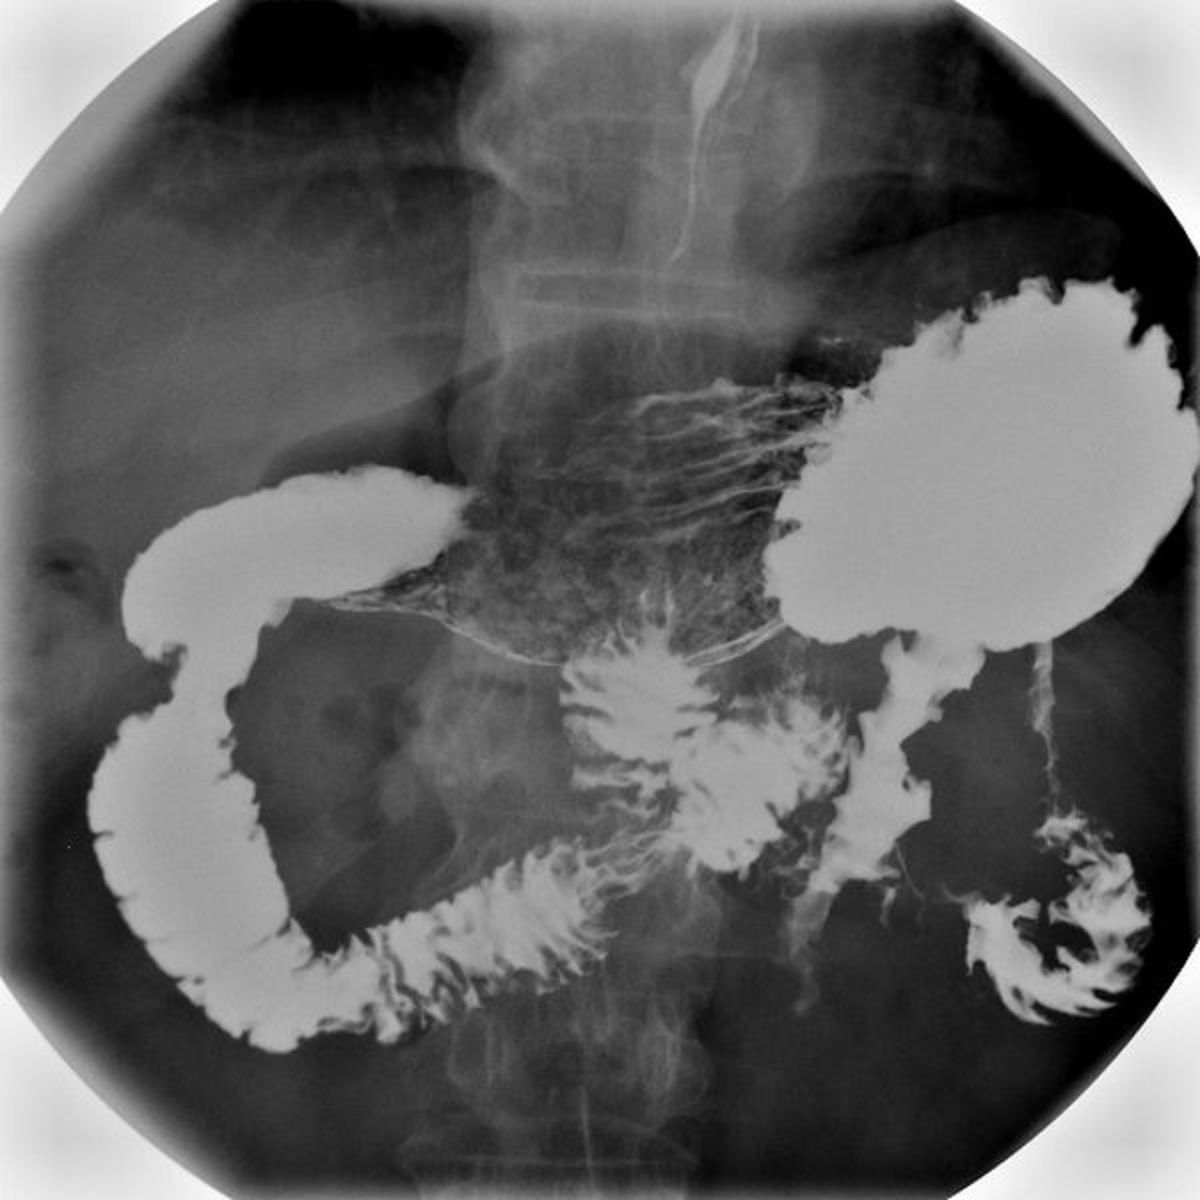 This is a radiocontrast x-ray of the stomach done using barium meal (or a "barium swallow").